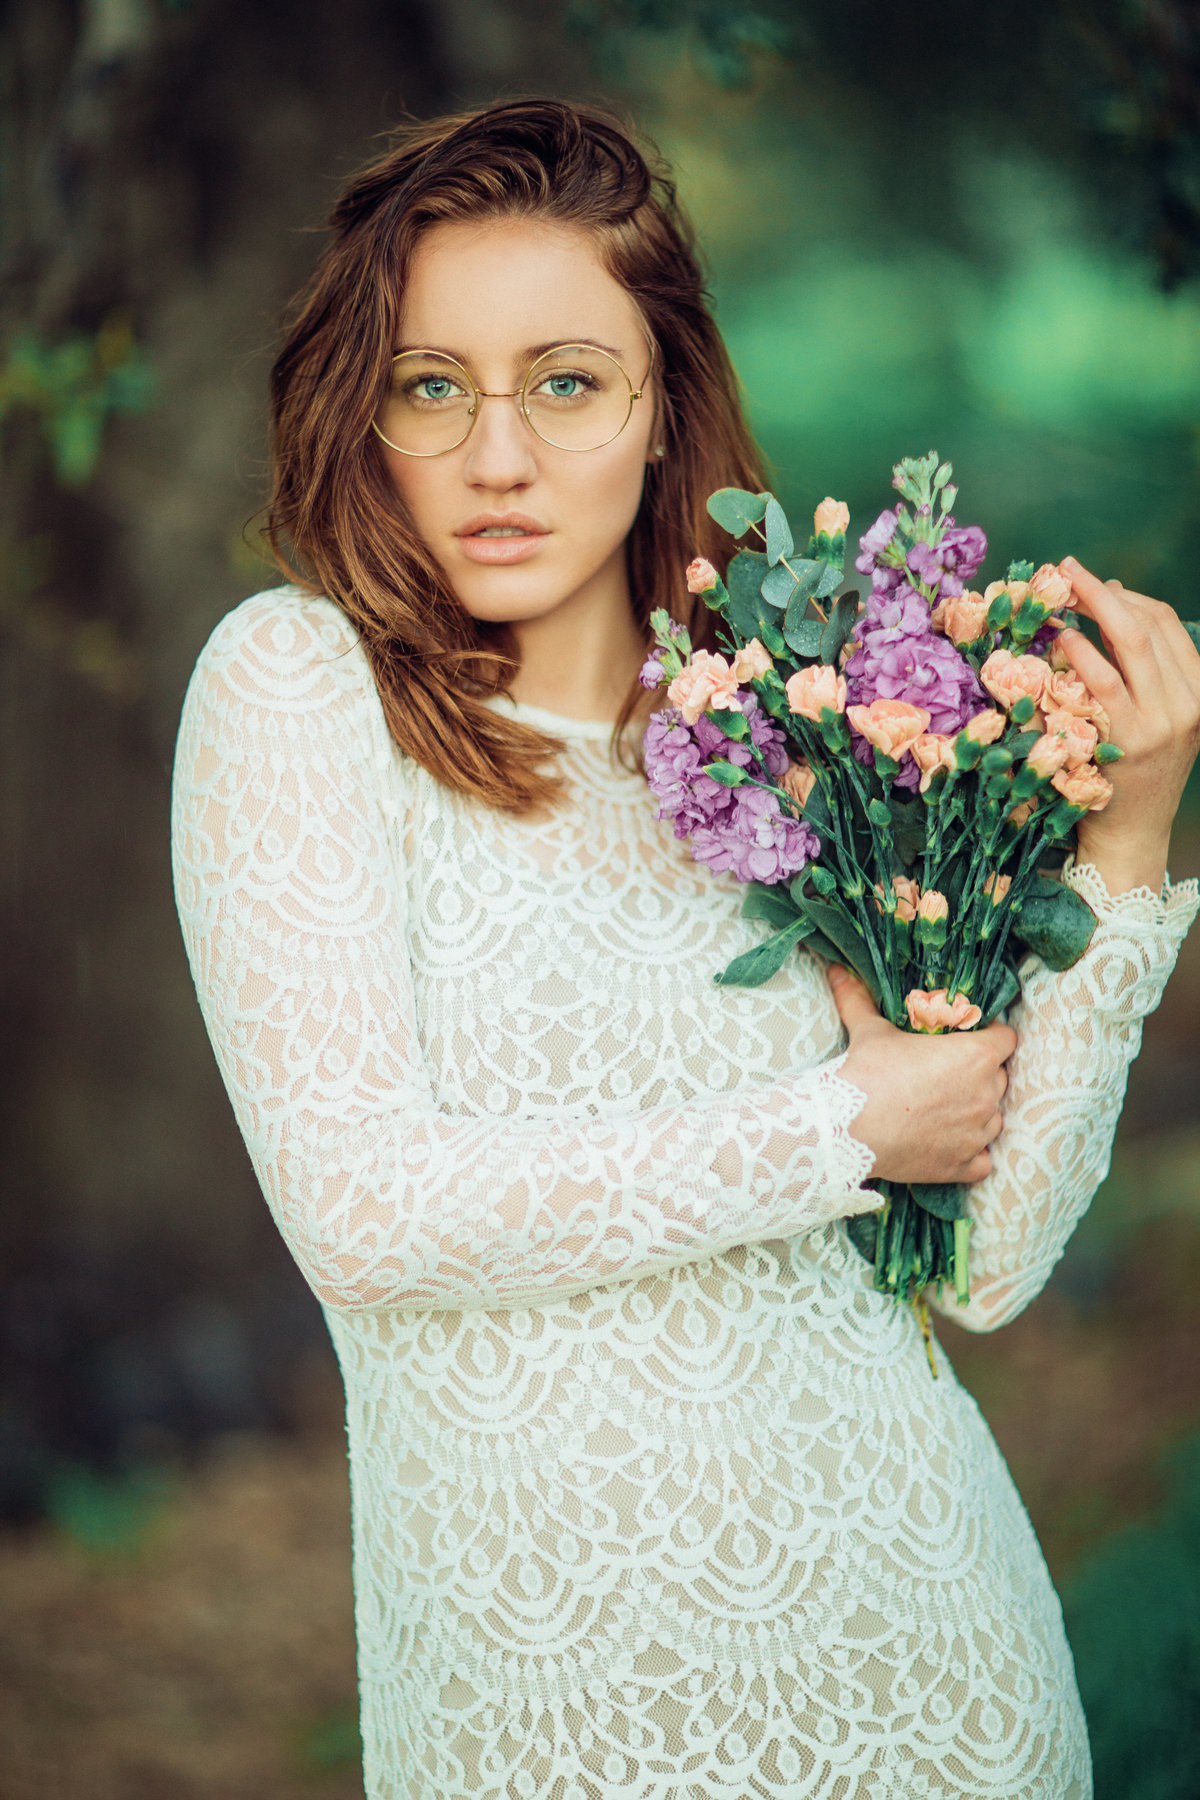 Young Woman With Flowers in Dress Portrait Photography